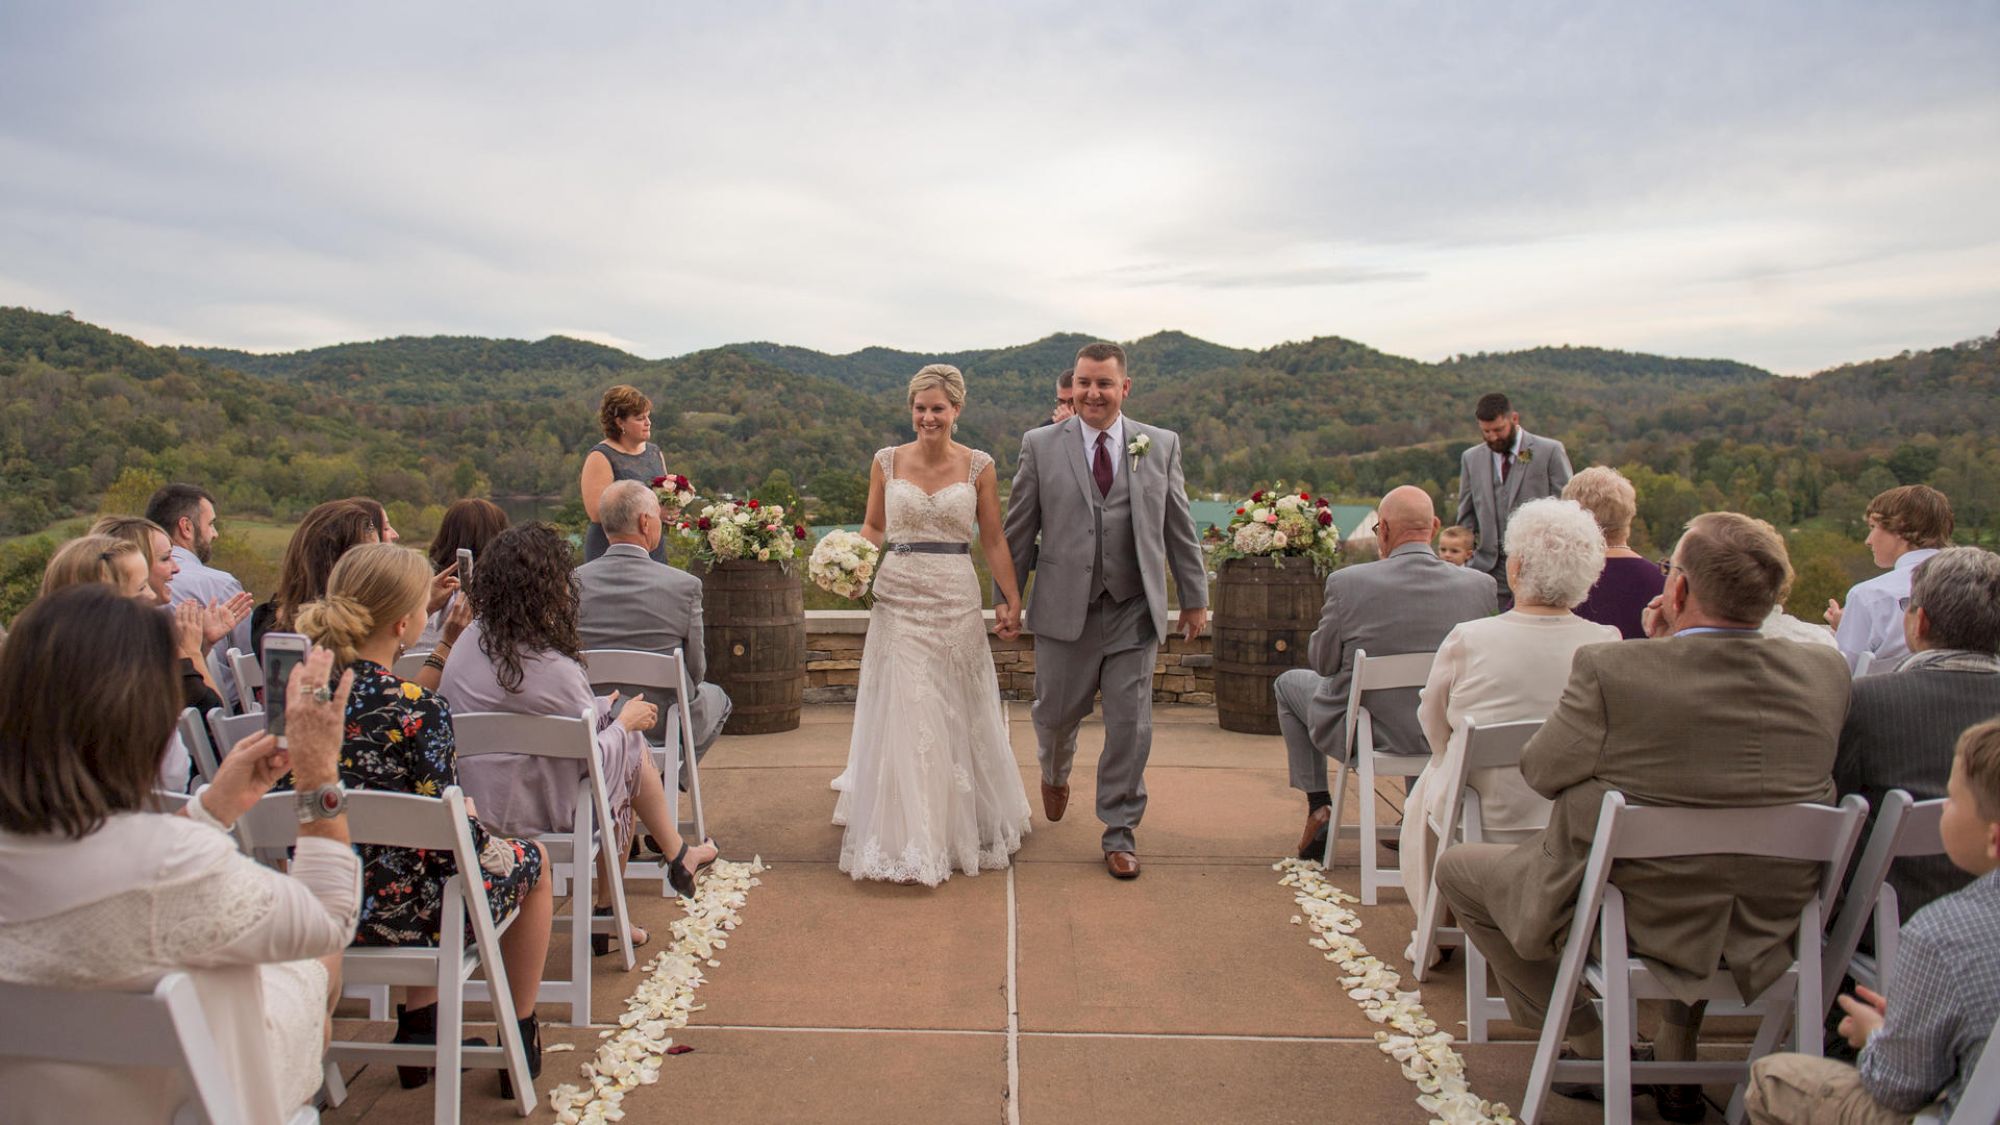 A bride and groom walk down the aisle at an outdoor wedding ceremony with mountains in the background and guests seated on either side.